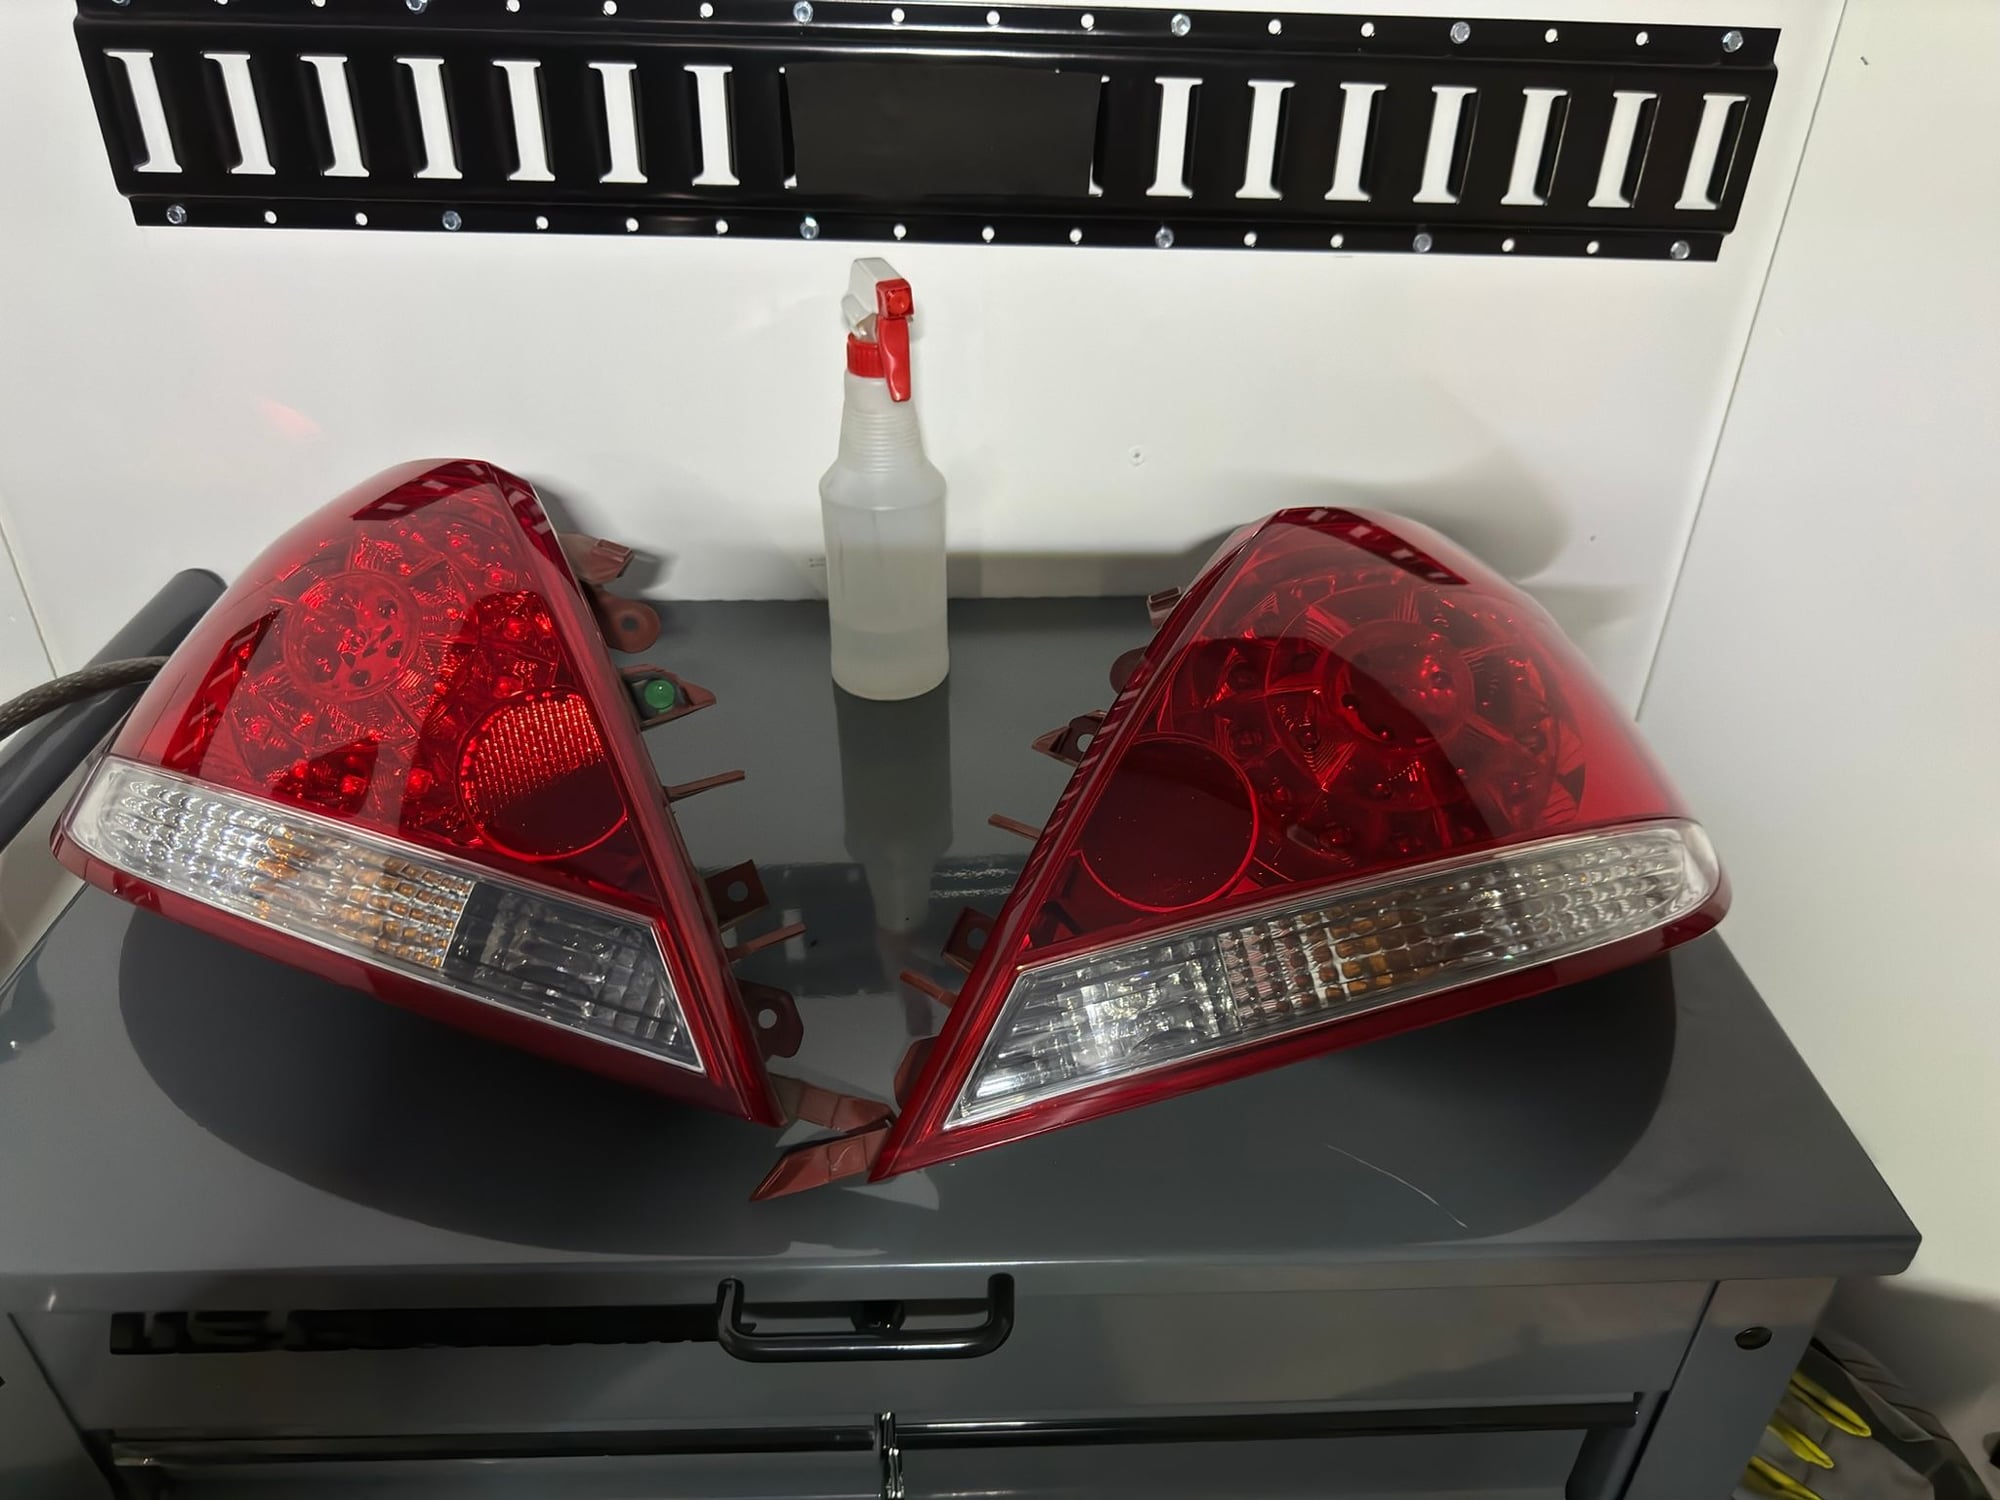 2006 Acura RL - Tail Lights complete - Accessories - $60 - Katy, TX 77494, United States